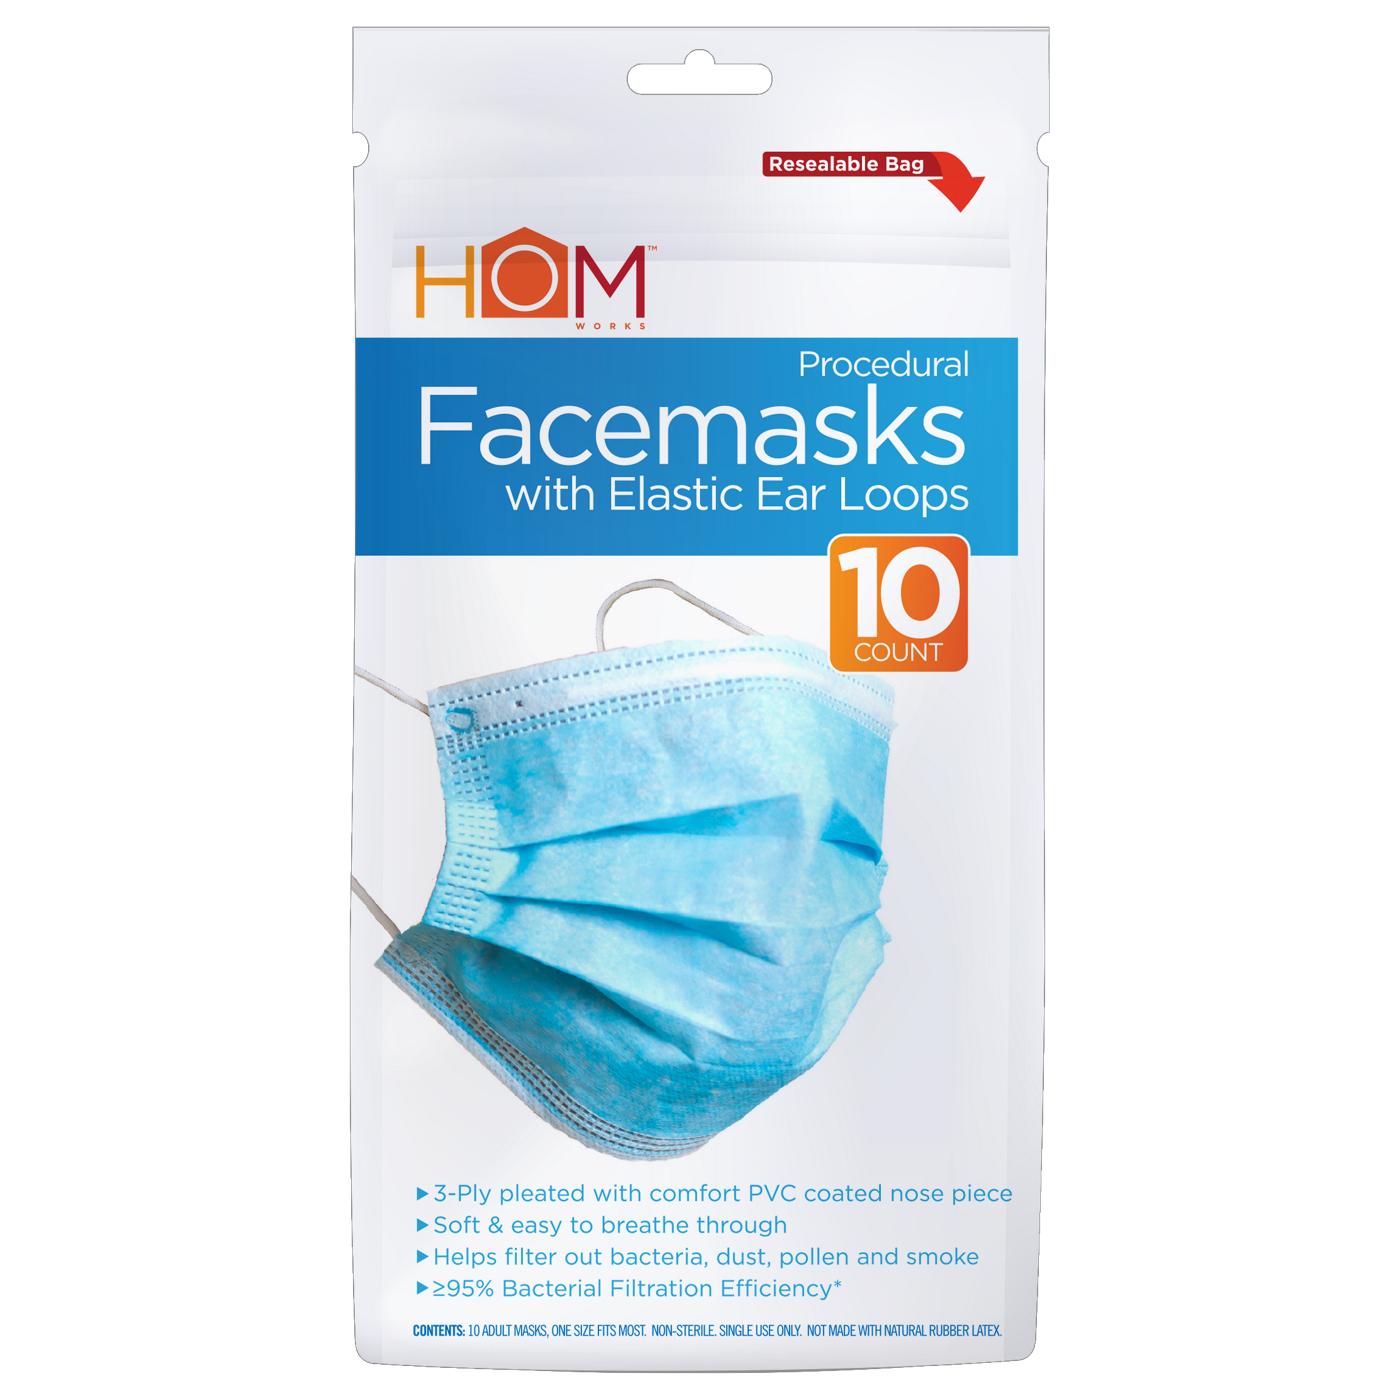 Hom Works Facemasks with Elastic Ear Loops; image 1 of 2